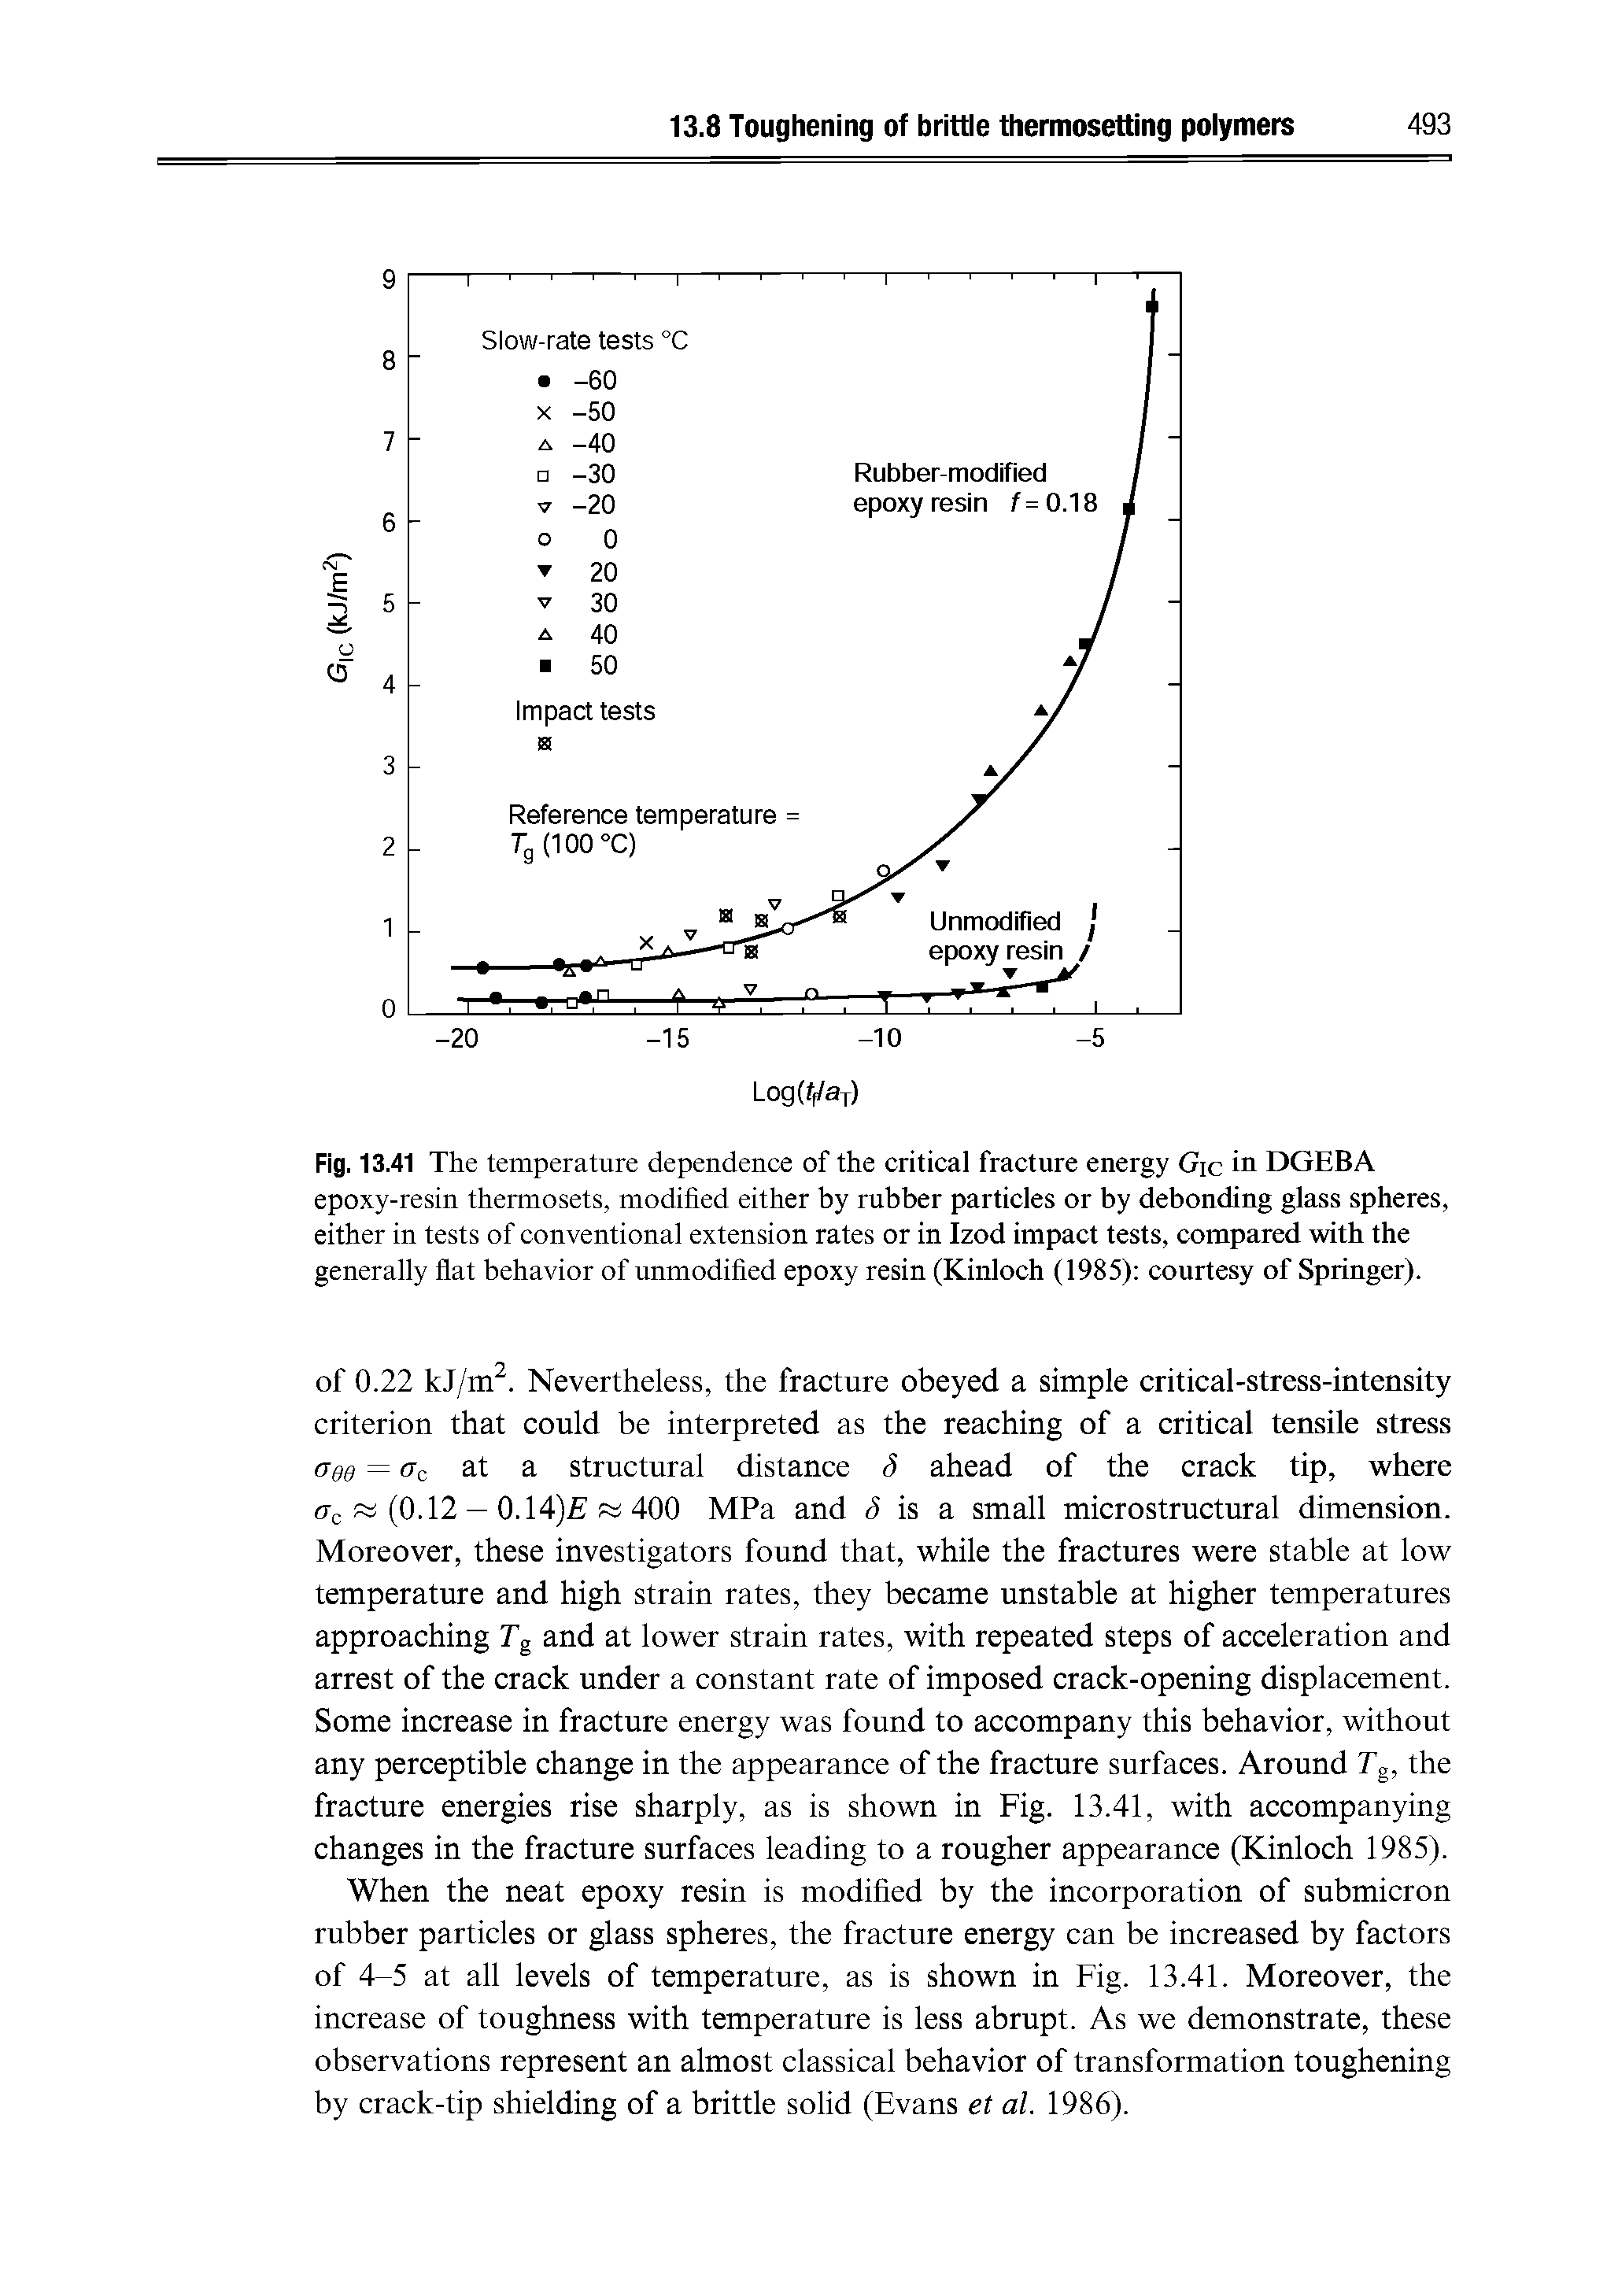 Fig. 13.41 The temperature dependence of the critical fracture energy Gic in DGEBA epoxy-resin thermosets, modified either by rubber particles or by debonding glass spheres, either in tests of conventional extension rates or in Izod impact tests, compared with the generally flat behavior of unmodified epoxy resin (Kinloch (1985) courtesy of Springer).